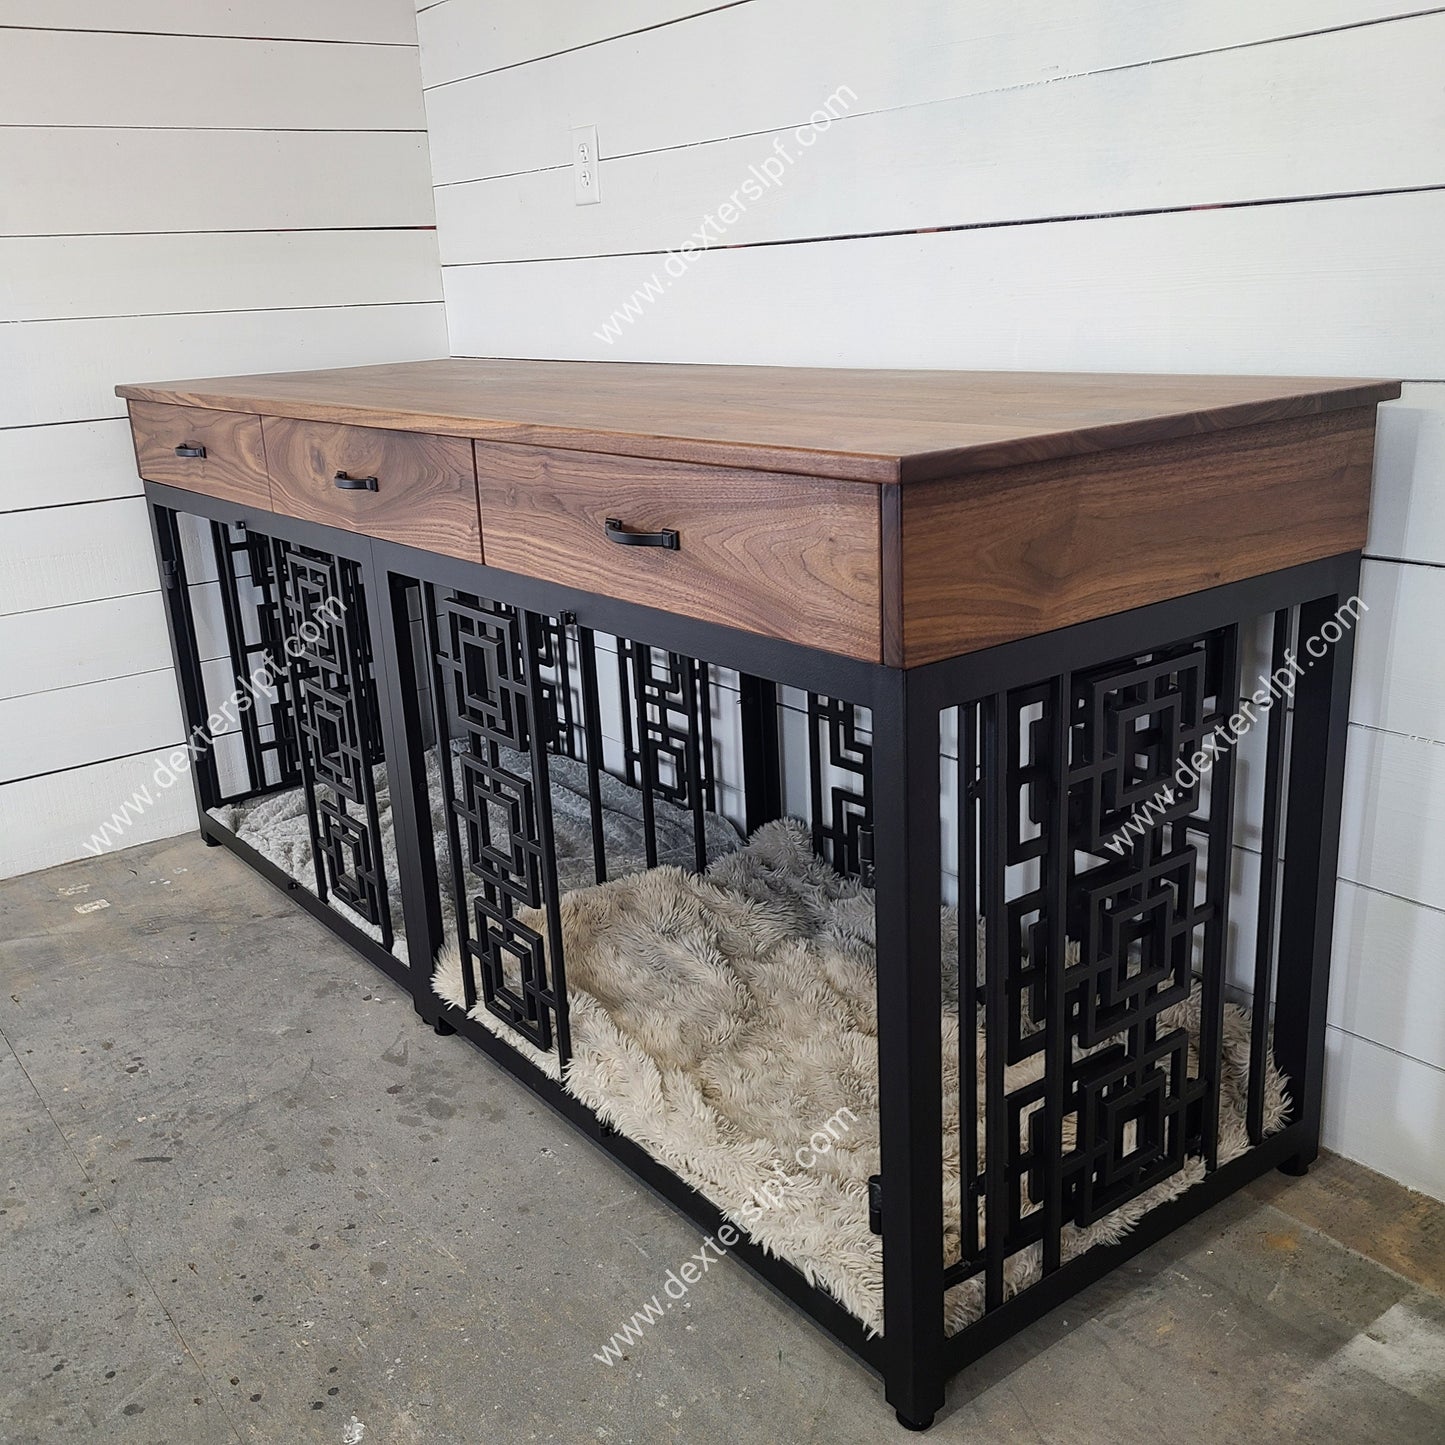 Sebby  Large Double with Drawers, Large Double Dog Crate, Dog Crate Furniture, Dog Kennel Furniture, Dog Crate